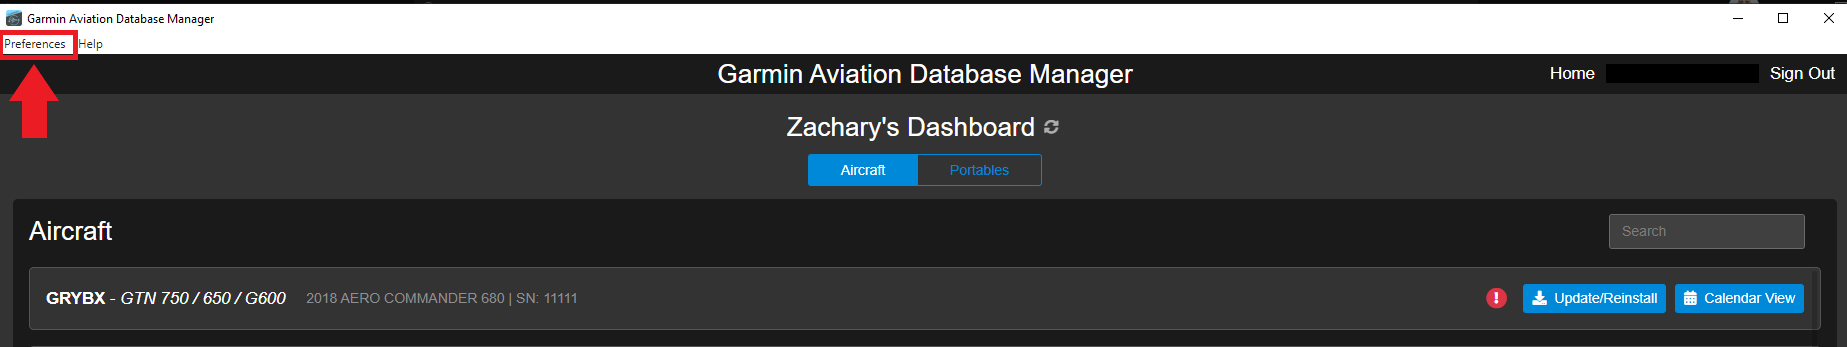 to Clear Downloads from the Garmin Aviation Database Manager Application | Garmin Support